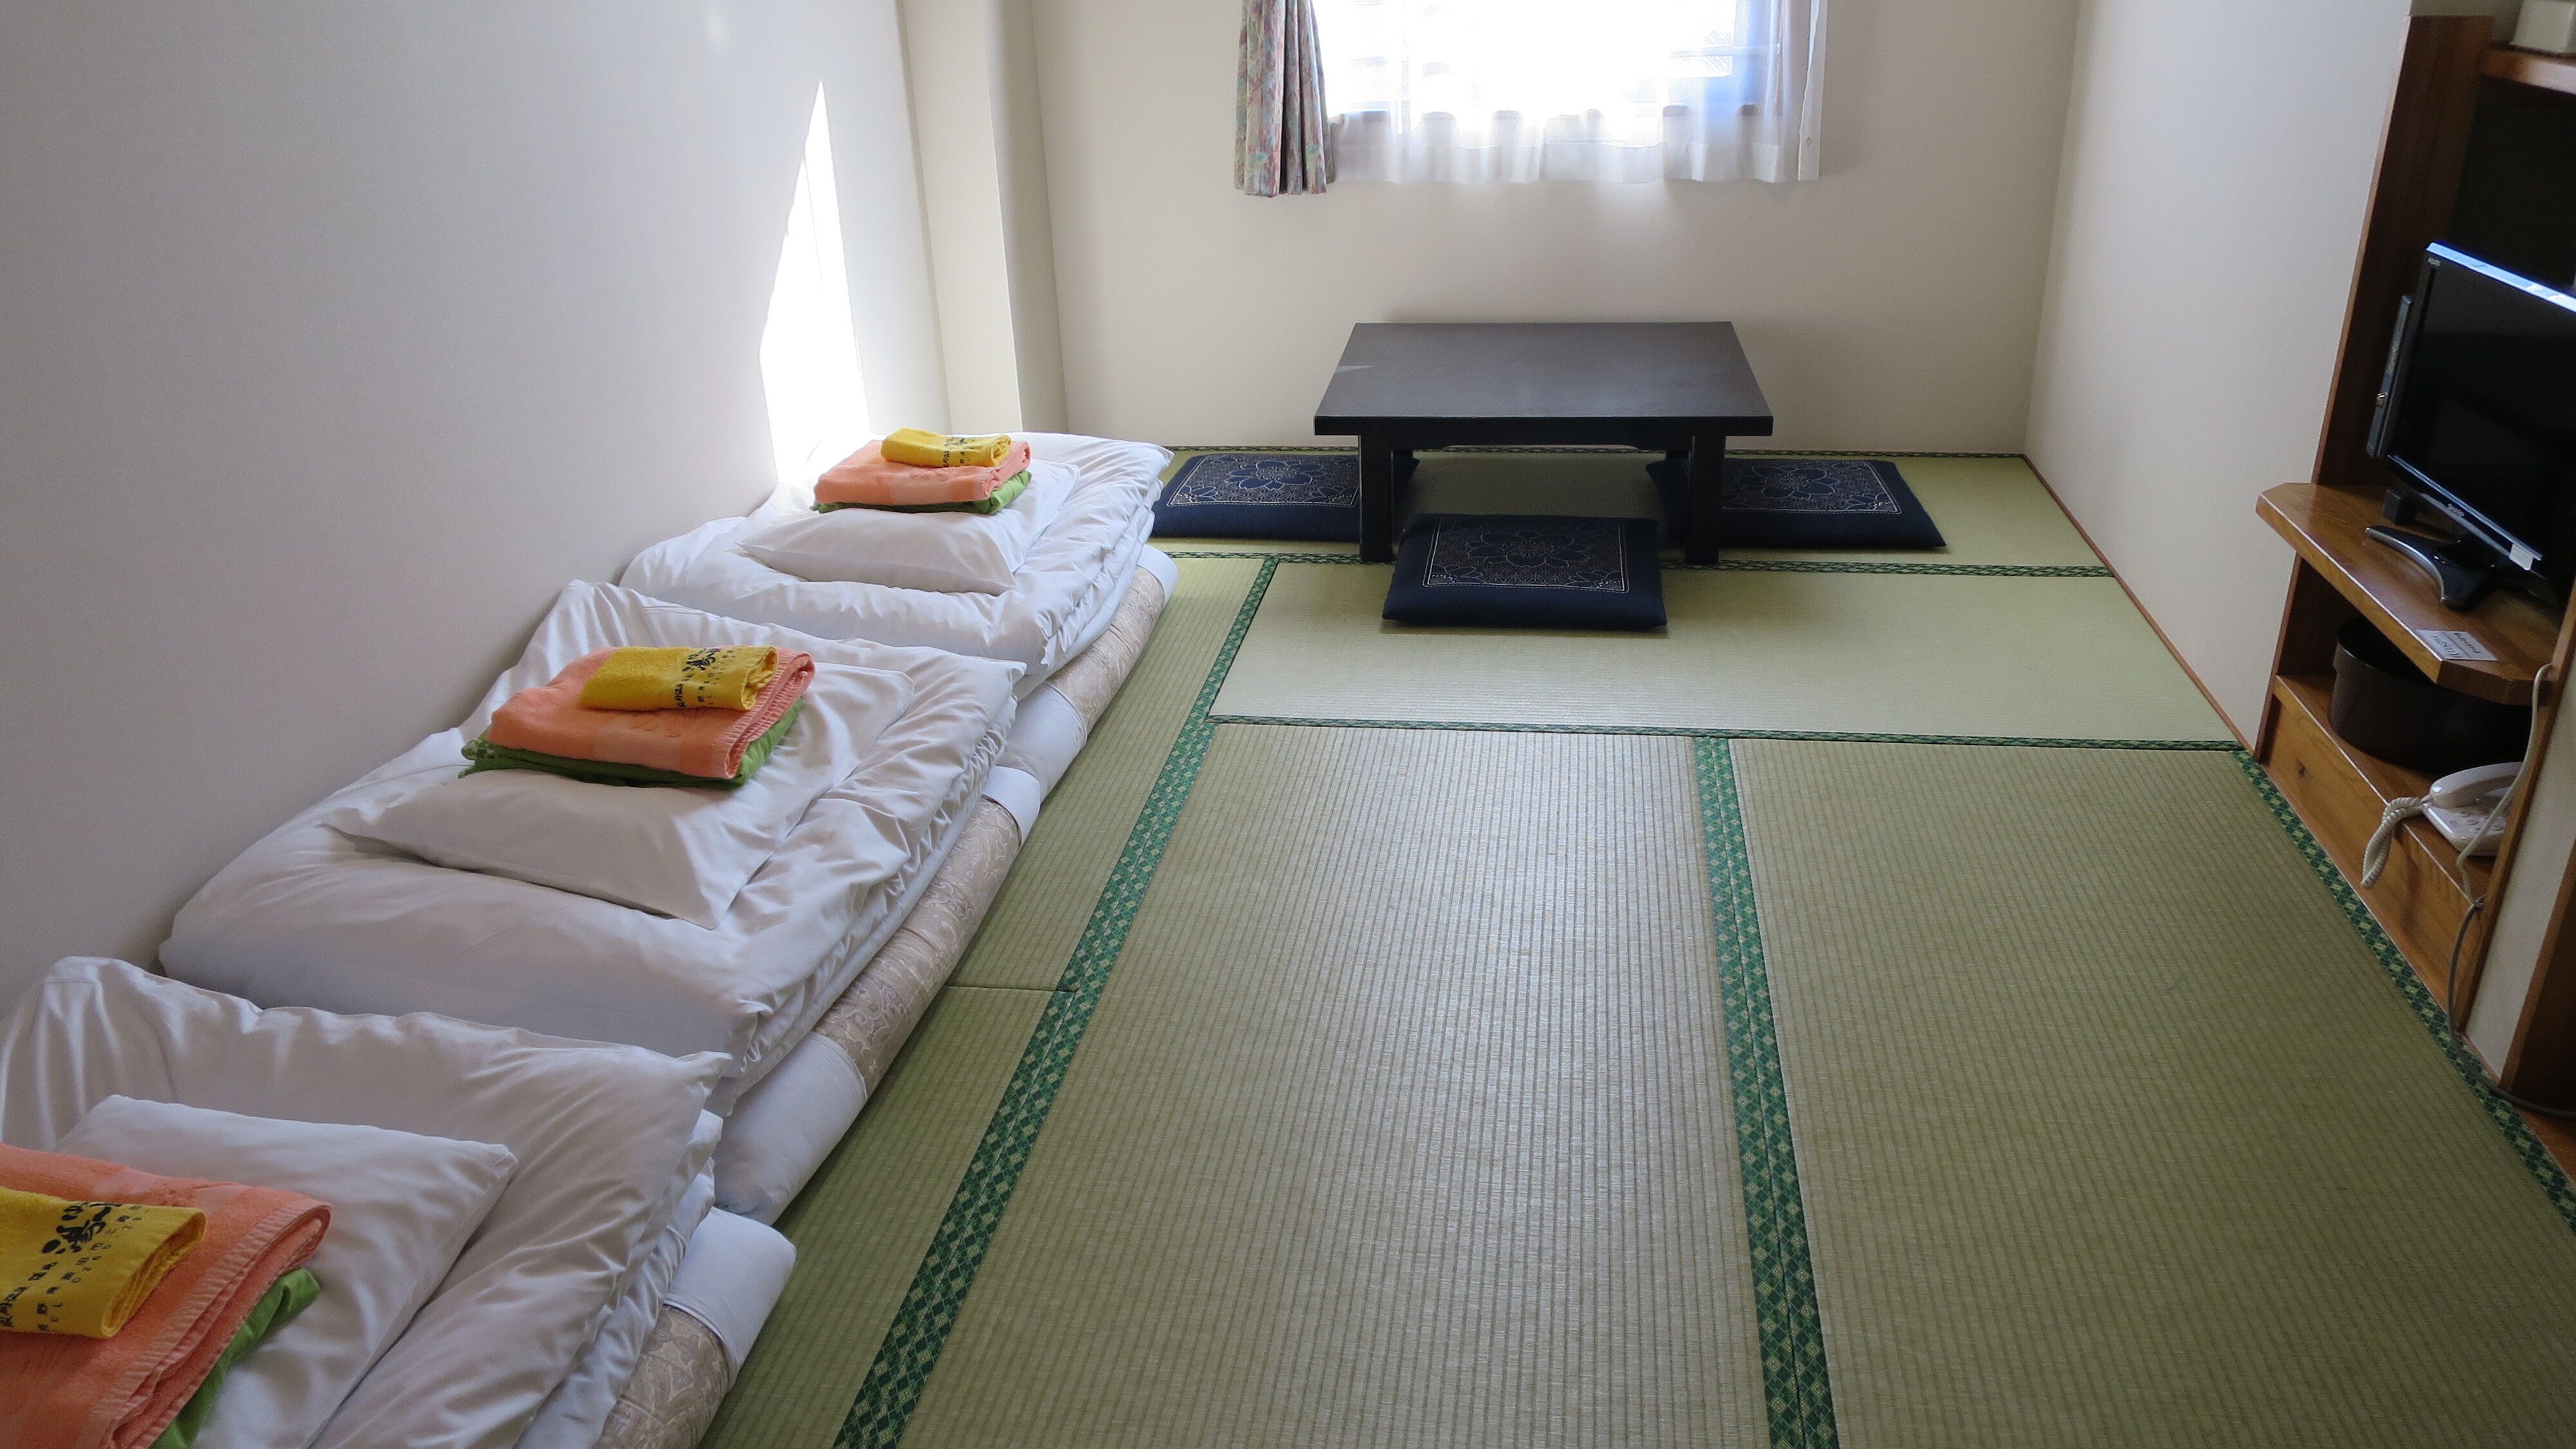 ◆ Japanese-style room for 3 people ◆